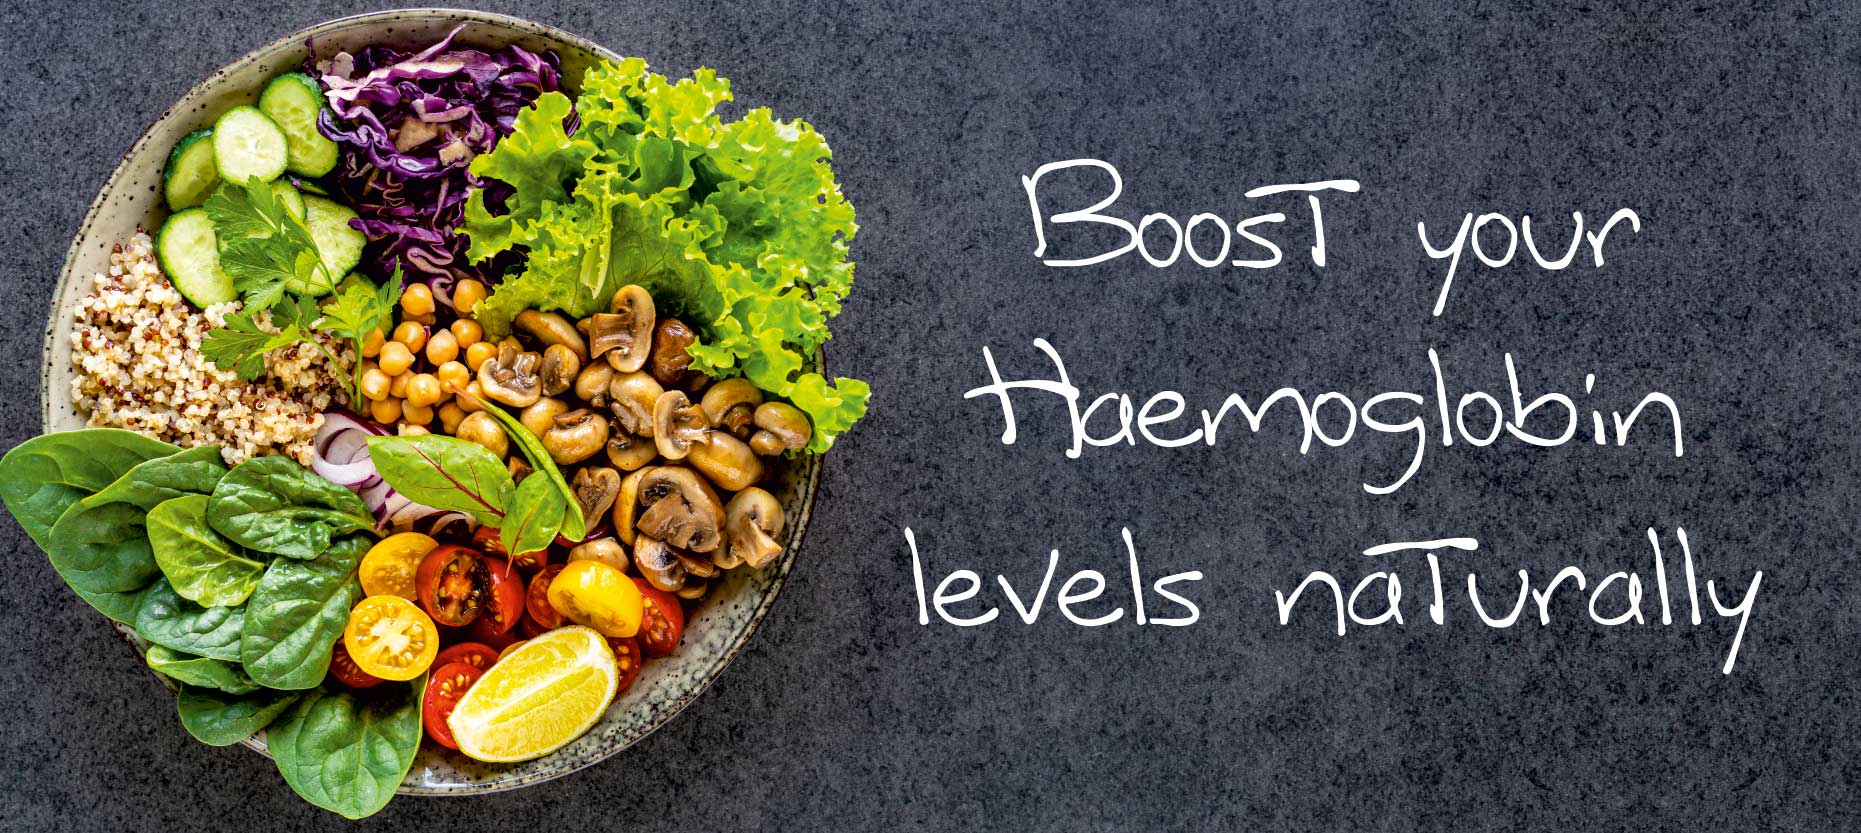 Boost your Haemoglobin levels naturally